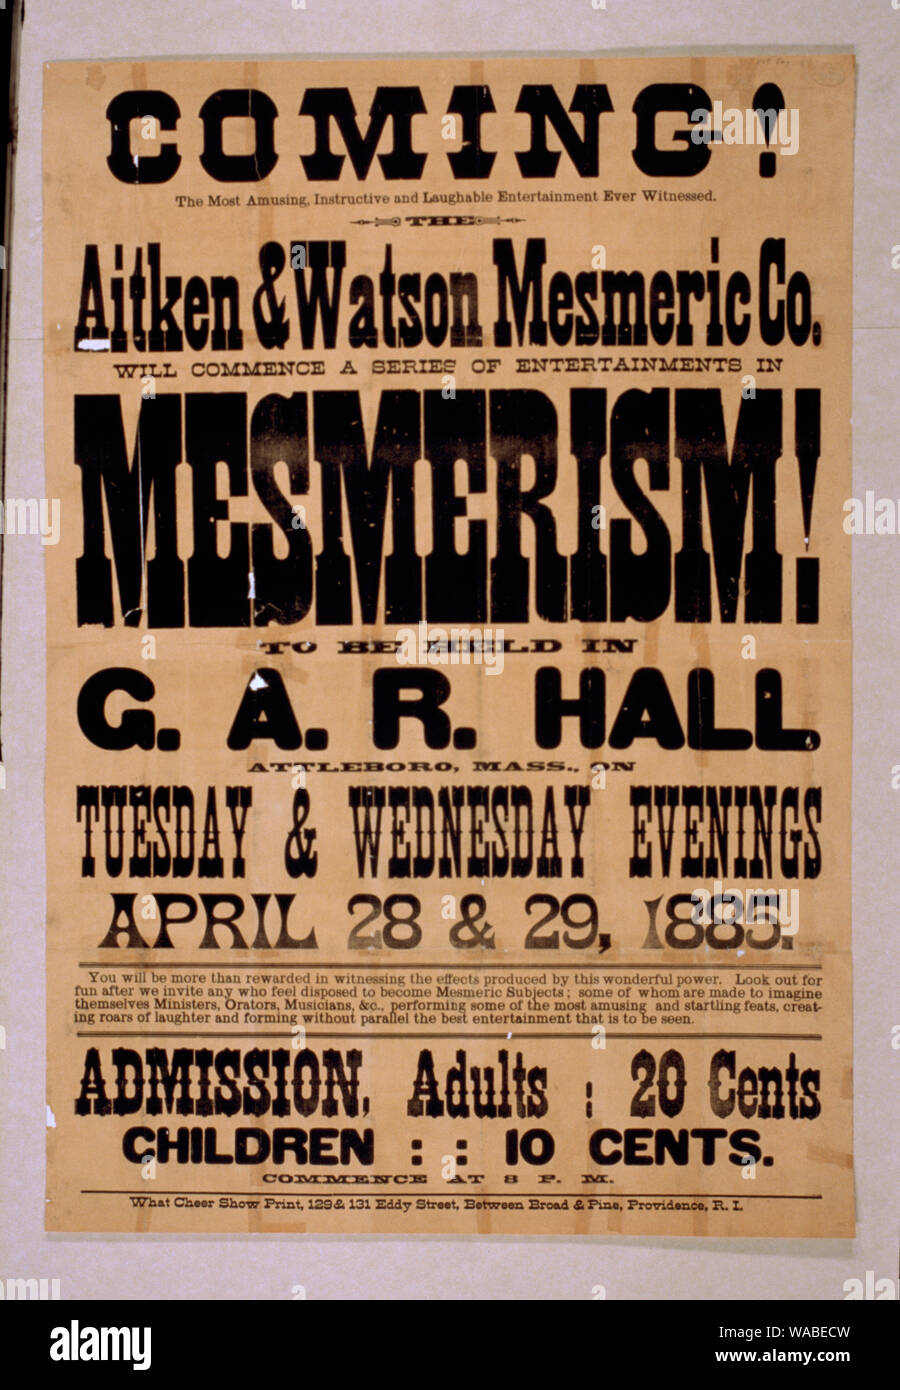 Coming! Aitken & Watson Mesmeric Co. will commence a series of entertainments in mesmerism! to be held in G.A.R. Hall, Attleboro, Mass. on Tuesday & Wednesday evenings, April 28 & 29, 1885. Stock Photo